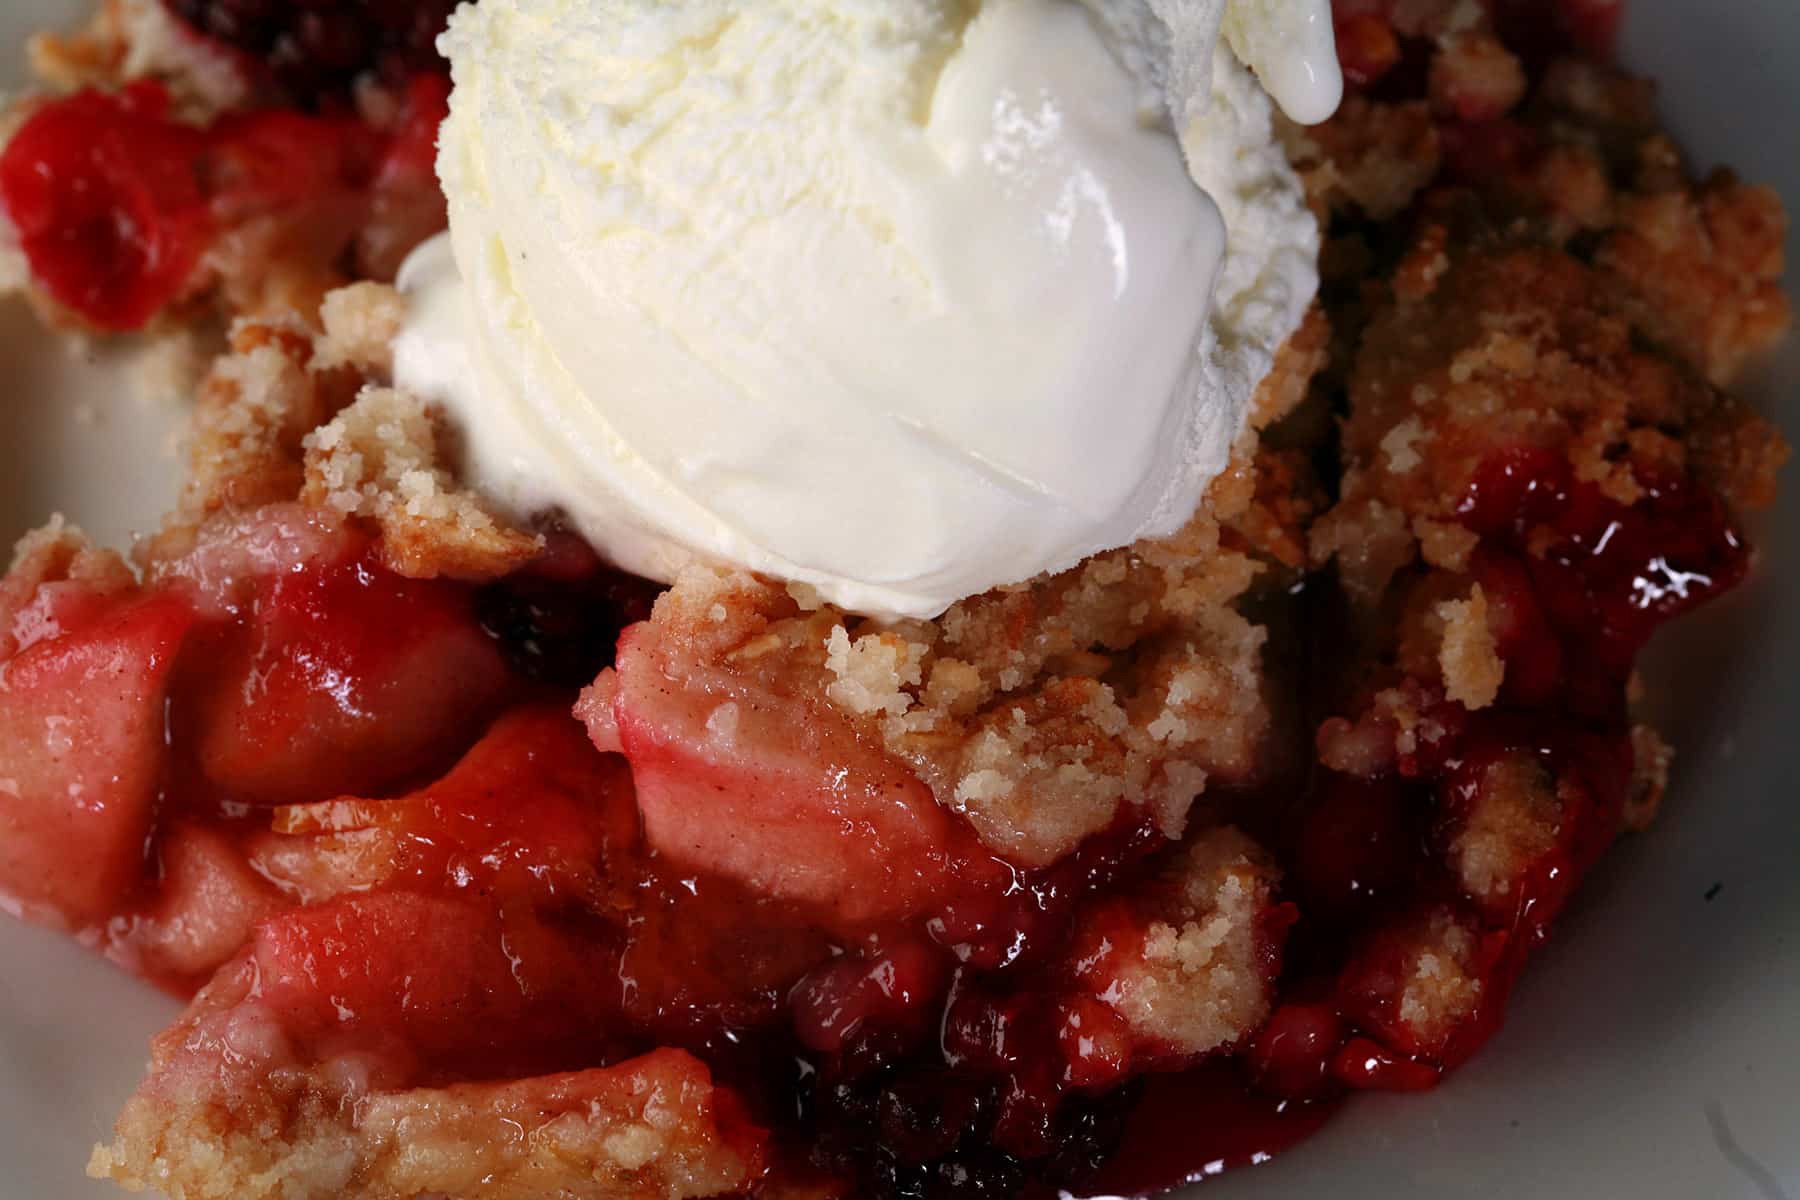 A serving of apple blackberry crumble topped with vanilla ice cream.